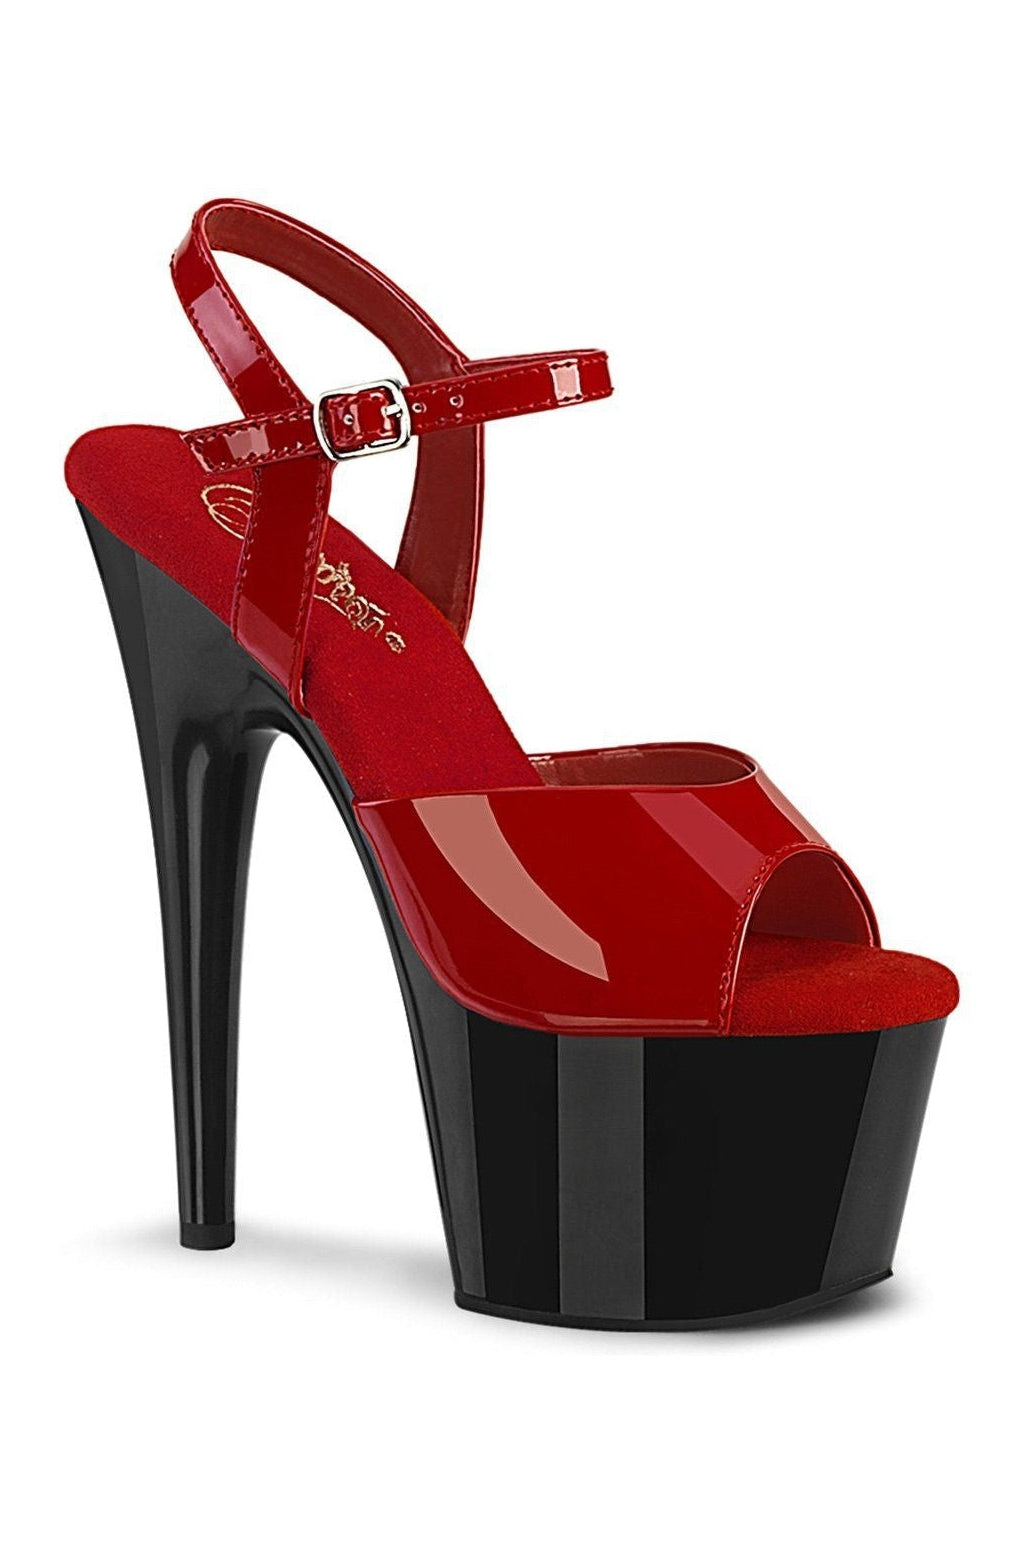 ADORE-709 Sandal | Red Patent-Sandals-Pleaser-Red-6-Patent-SEXYSHOES.COM